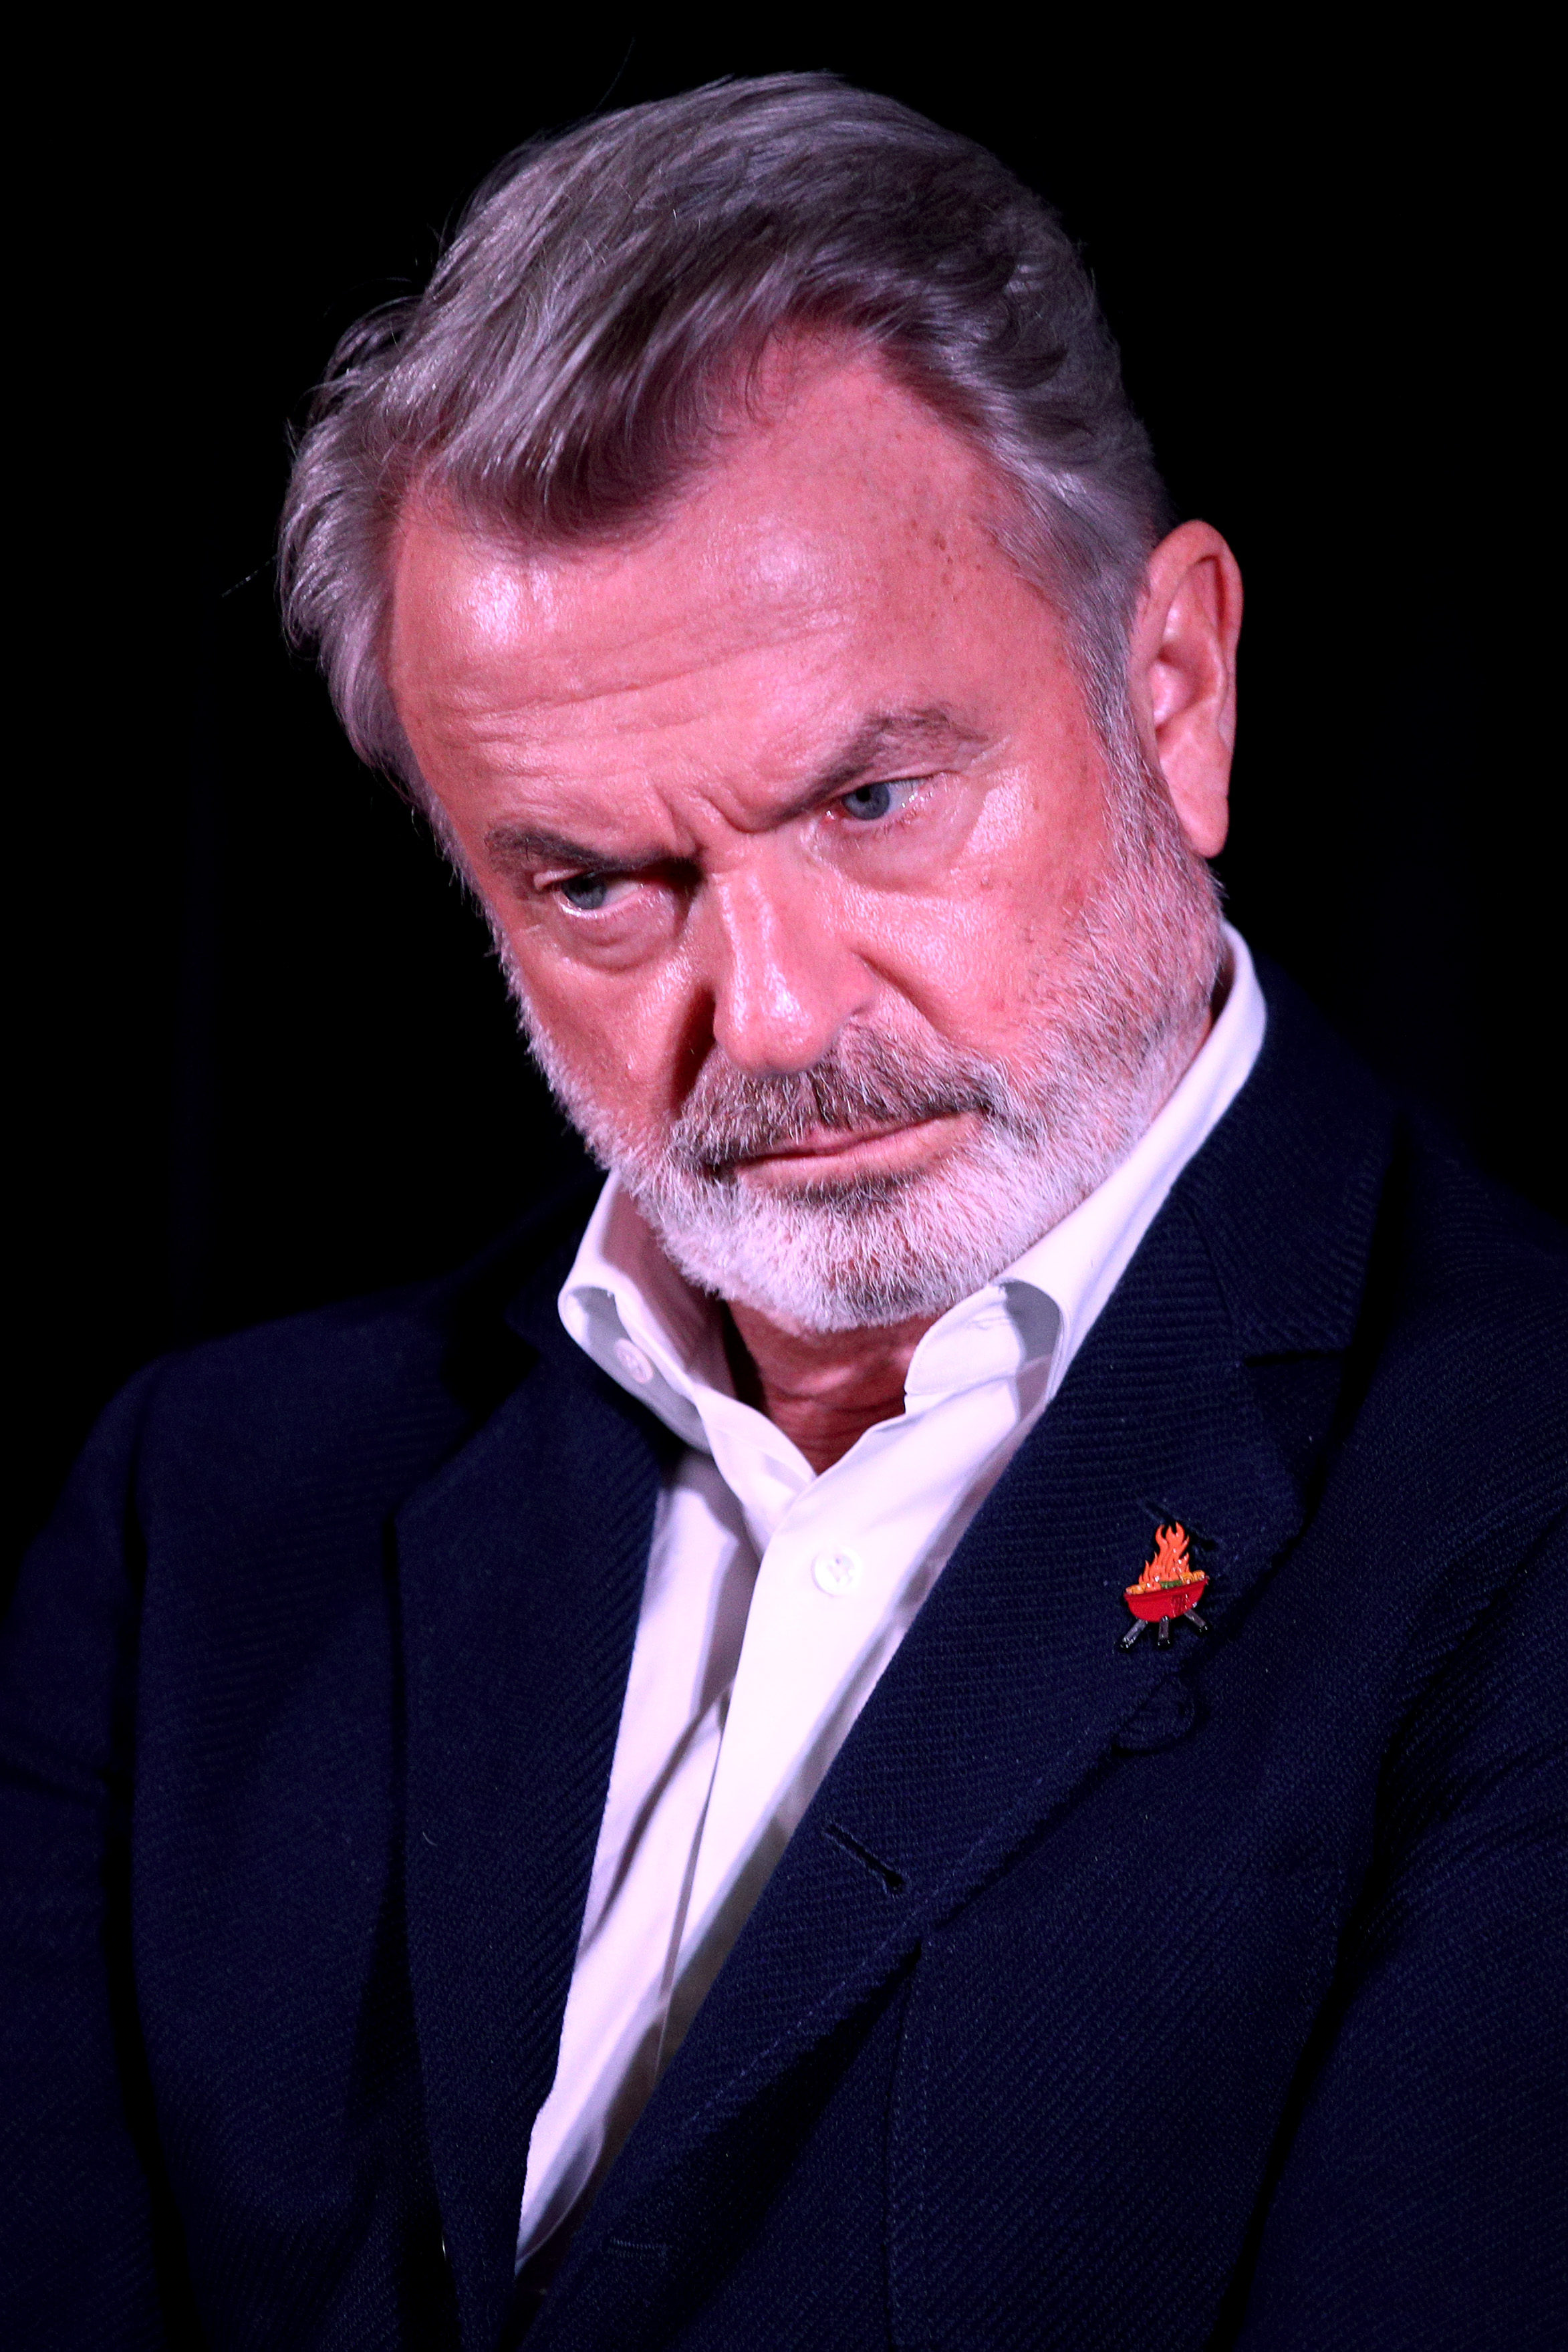 Sam Neill looks on during the cast announcement of Foxtel's new original crime drama series "The Twelve" on November 25, 2021 in Sydney, Australia. | Source: Getty Images